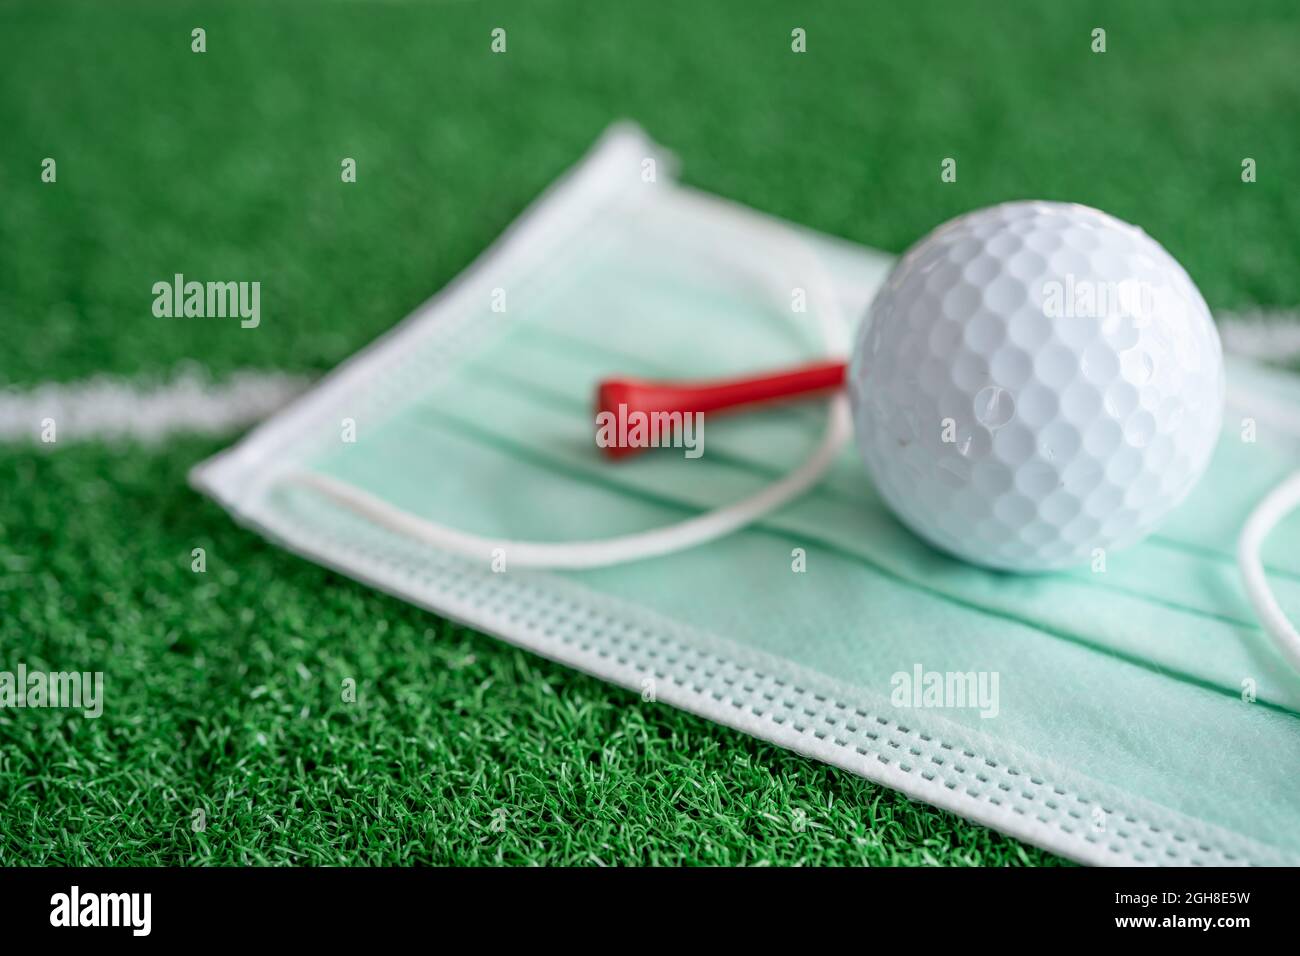 Golf ball with tee on face mask for protect covid-19 coronavirus in tournament at golf course. Stock Photo